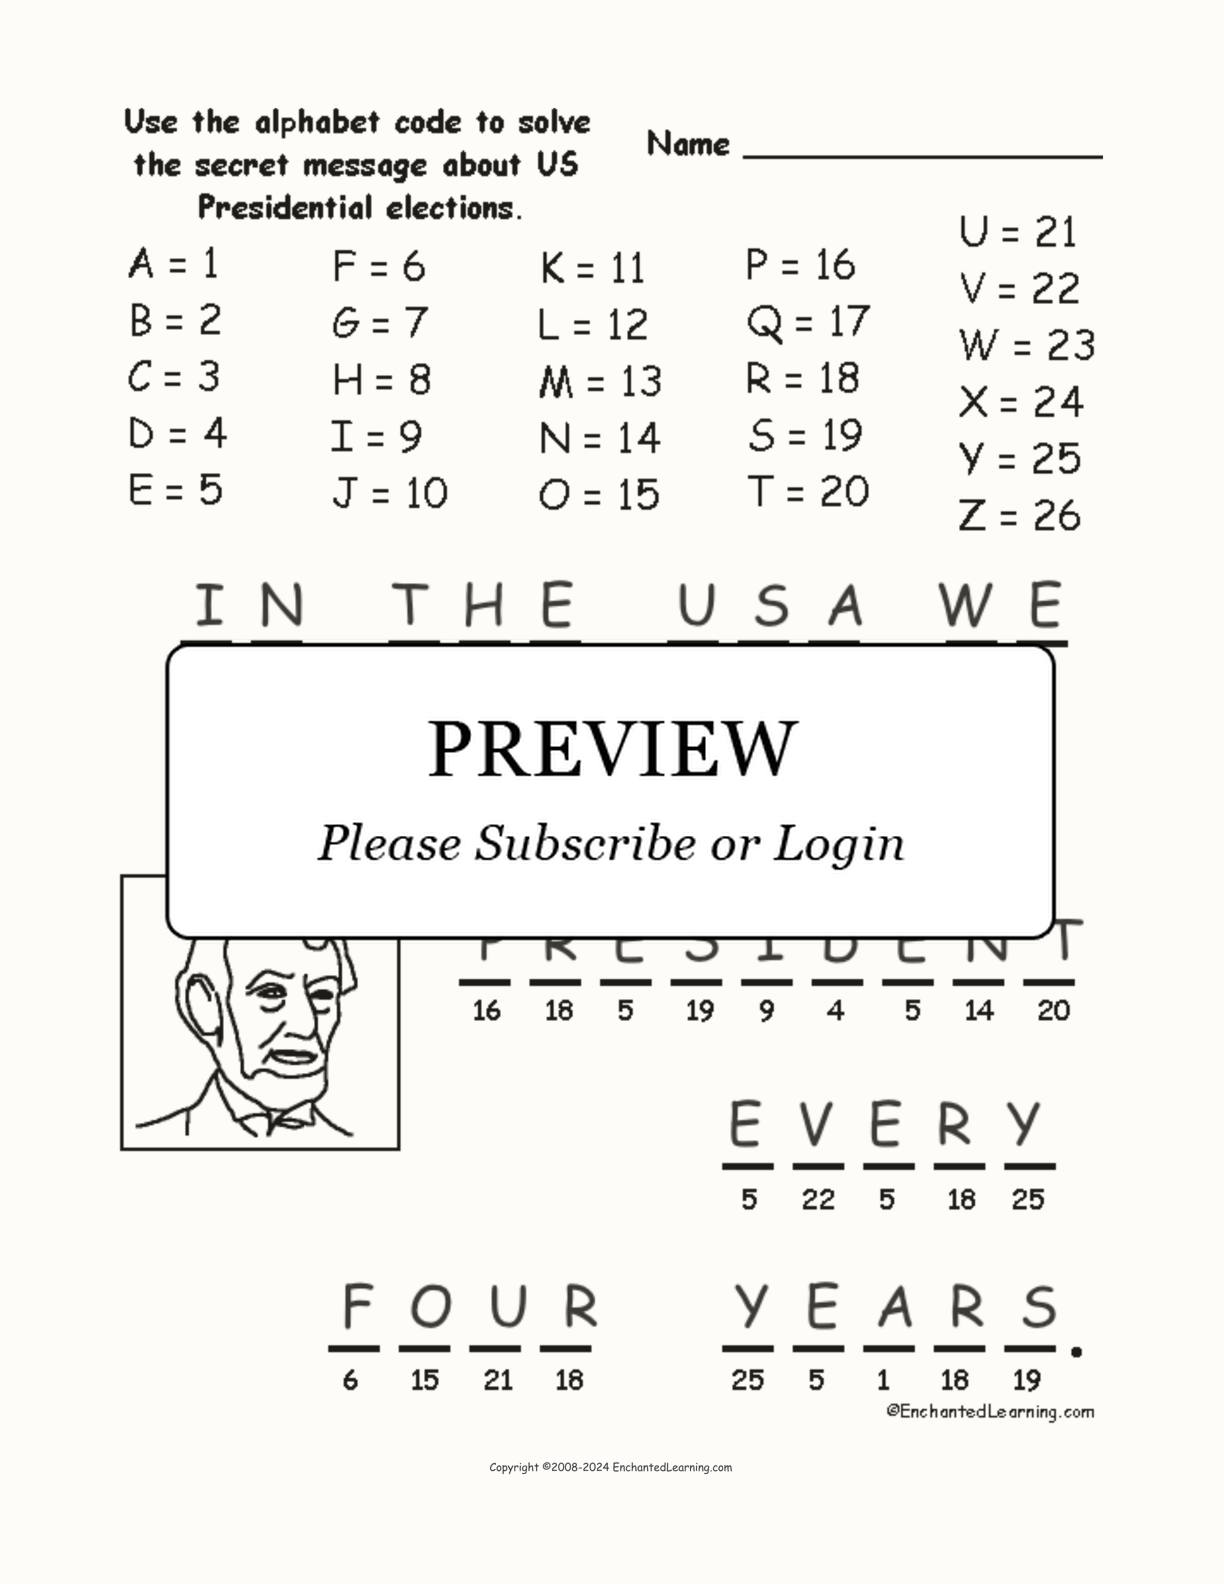 Presidential Election Alphabet Code interactive worksheet page 2